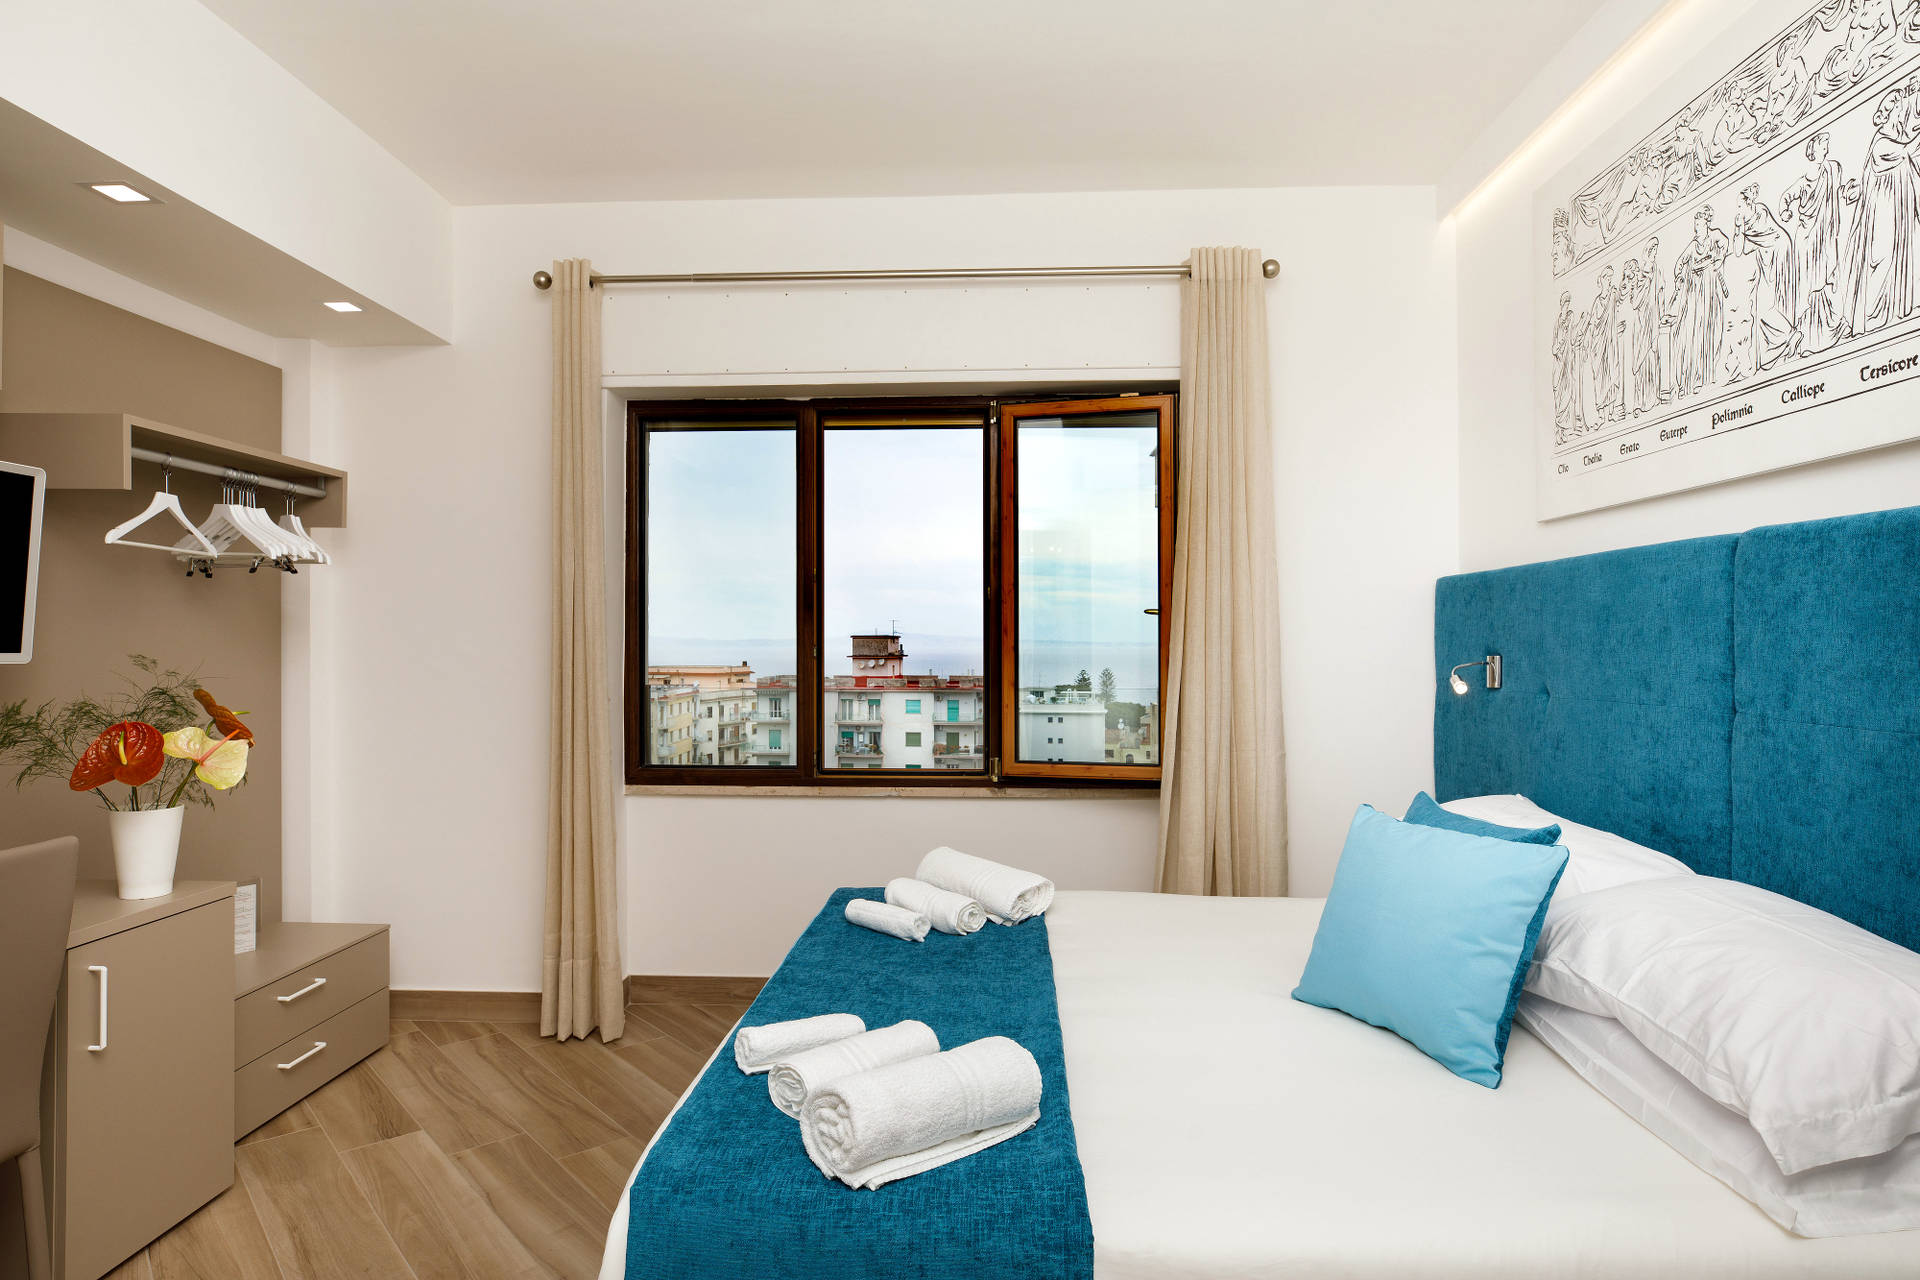 Deluxe double Room with sea view